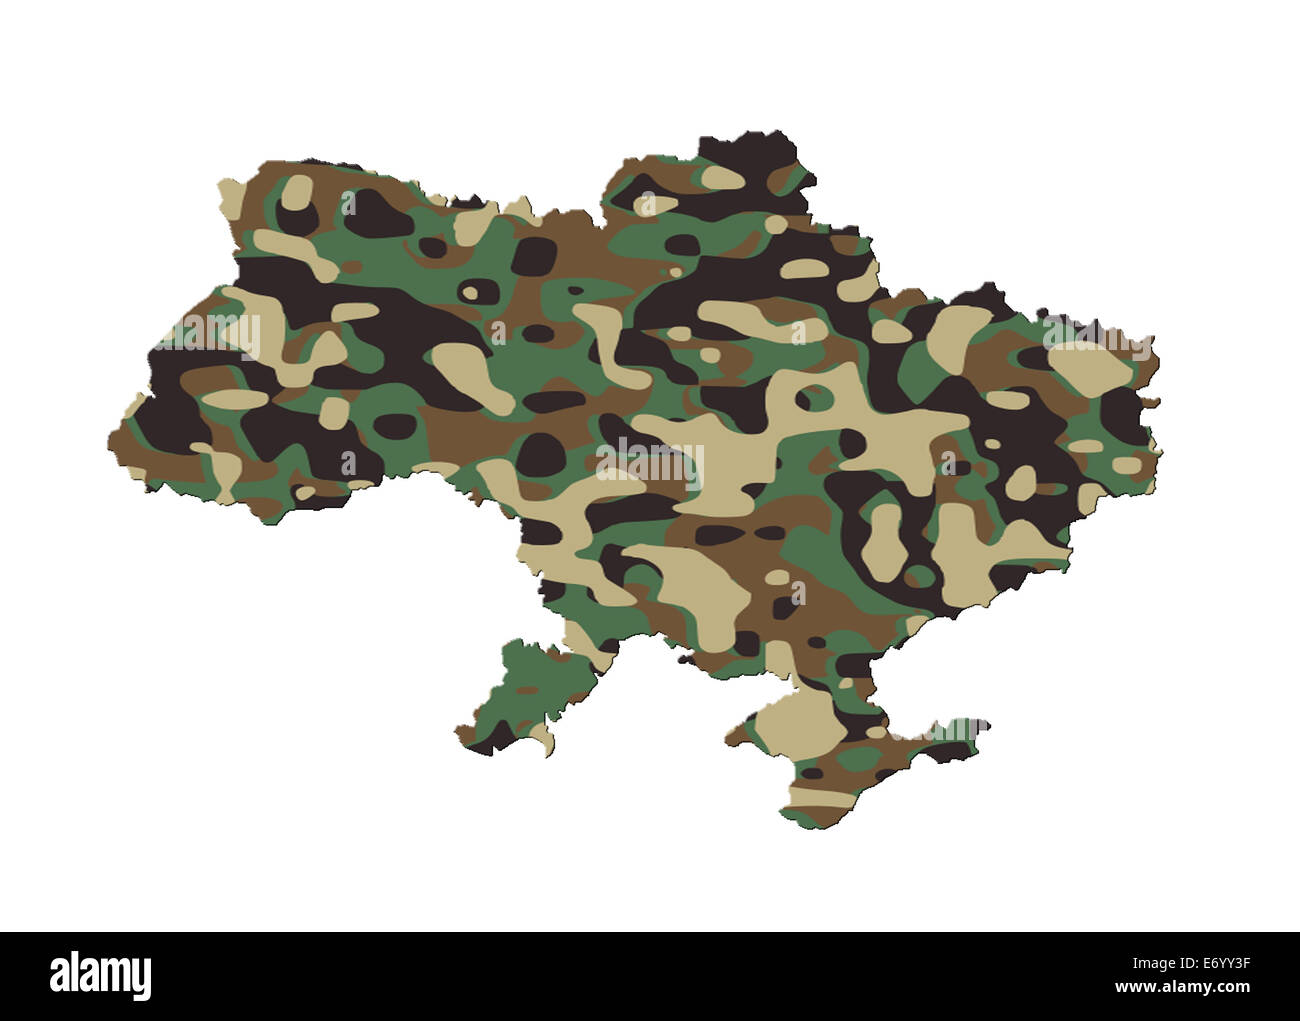 Ukraine - Map, filled with an army camo pattern Stock Photo